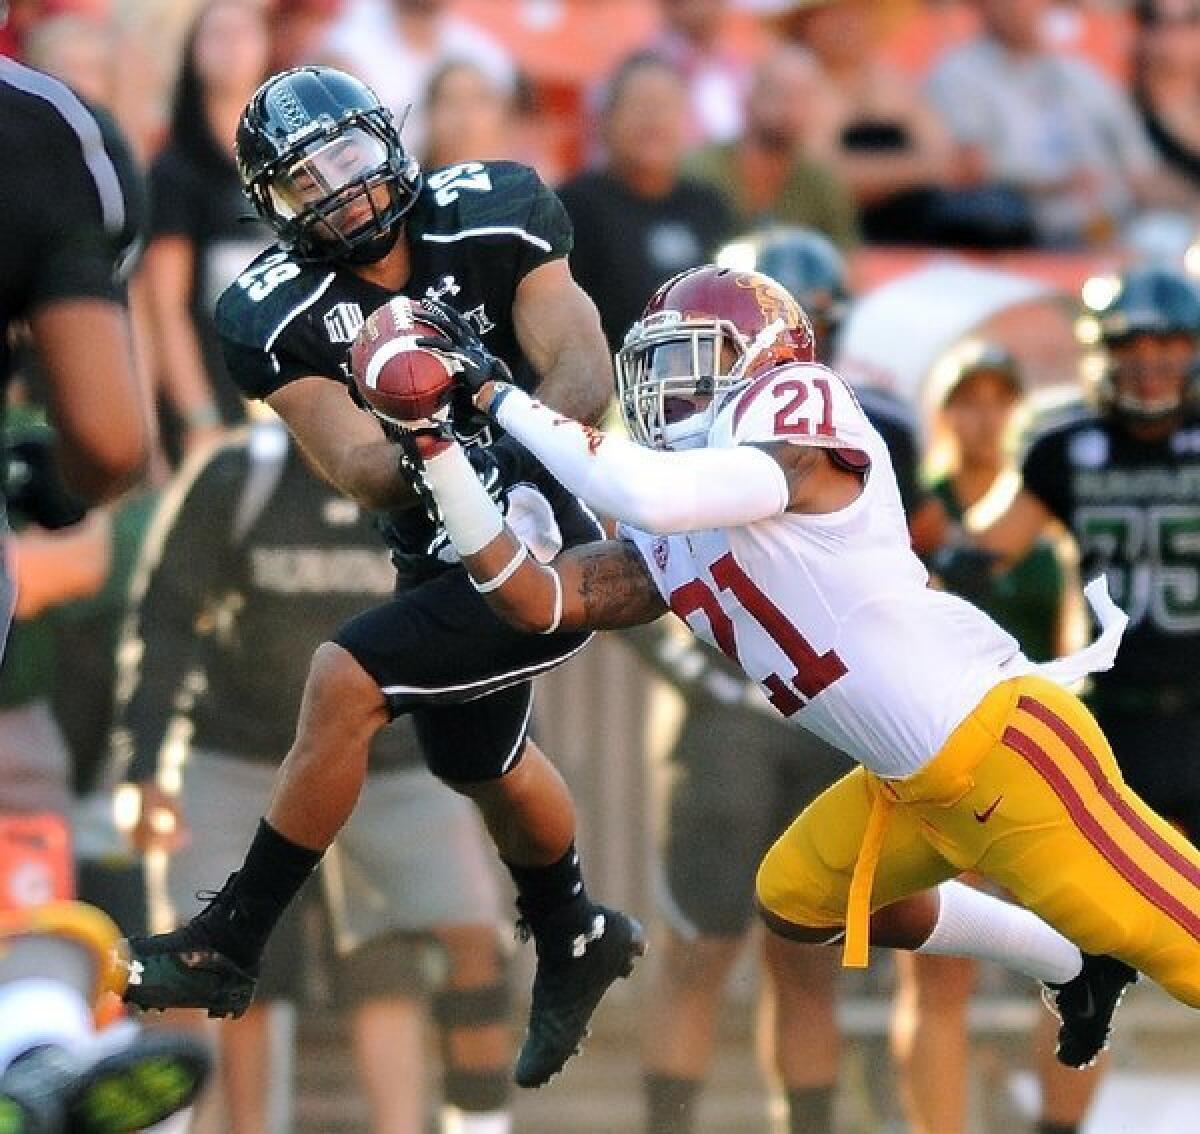 USC's Su'a Cravens intercepts a pass in front of Hawaii receiver Scott Harding in the first quarter.